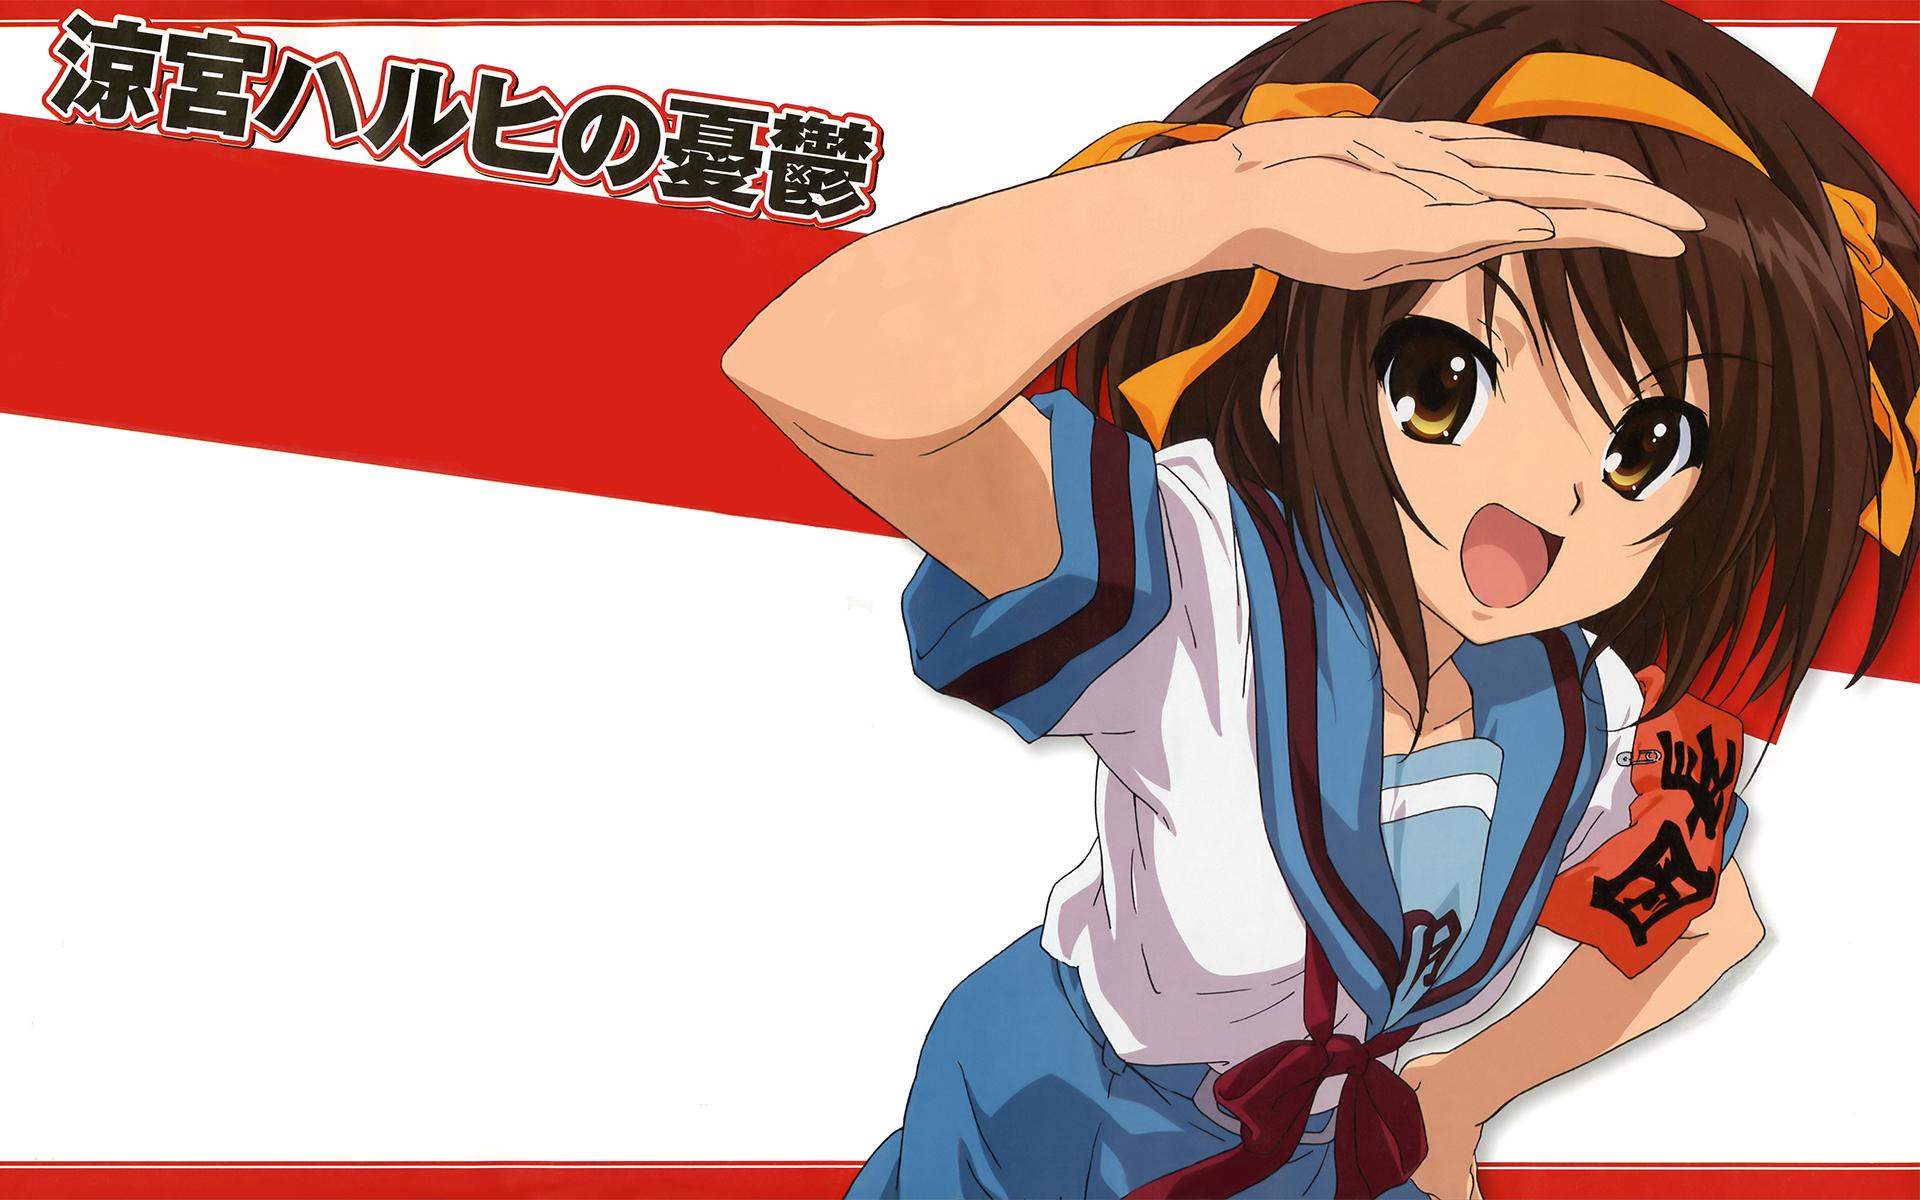 Wallpaper kiss, anime, two, a couple, date, Melancholy, Of Haruhi Suzumiya  for mobile and desktop, section прочее, resolution 1920x1080 - download